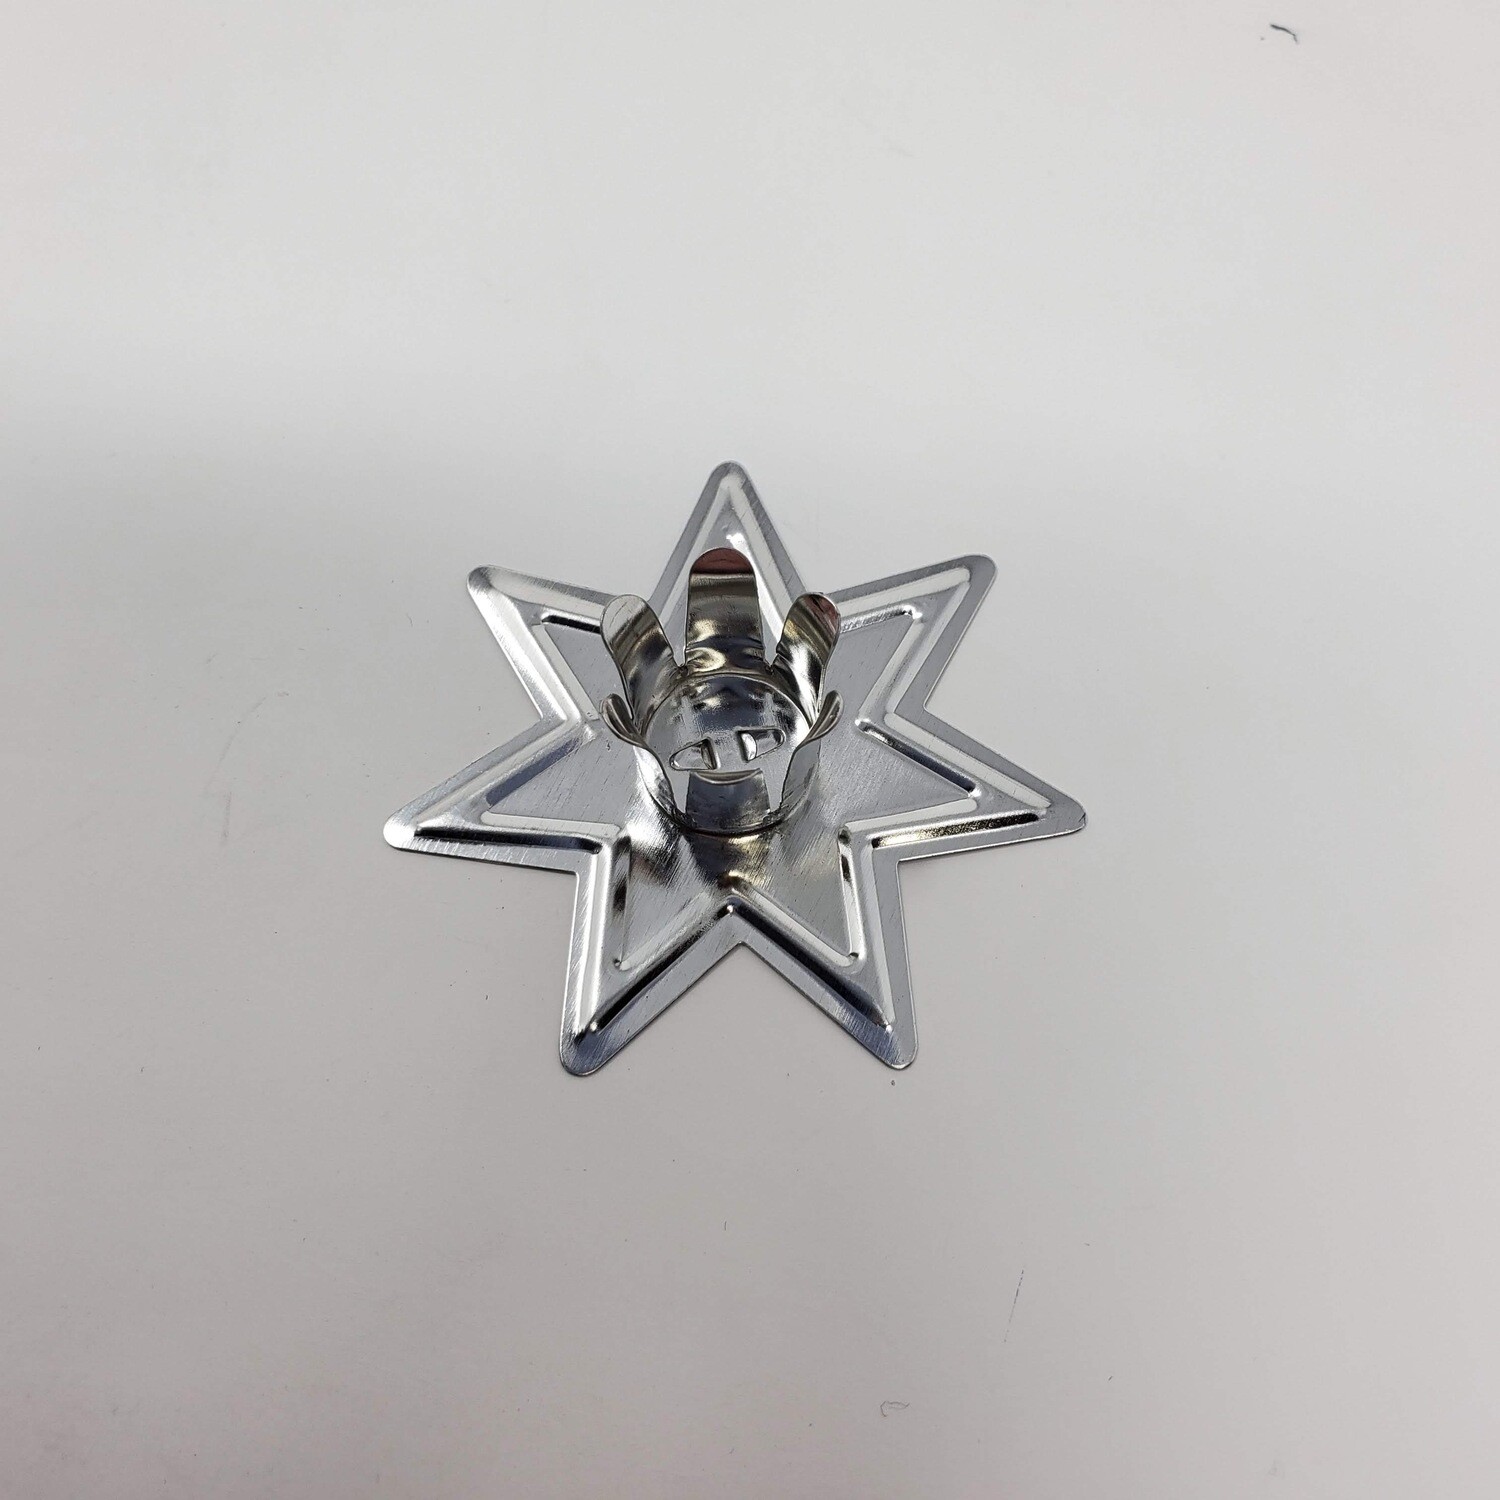 SILVER STAR CHIME CANDLE HOLDER